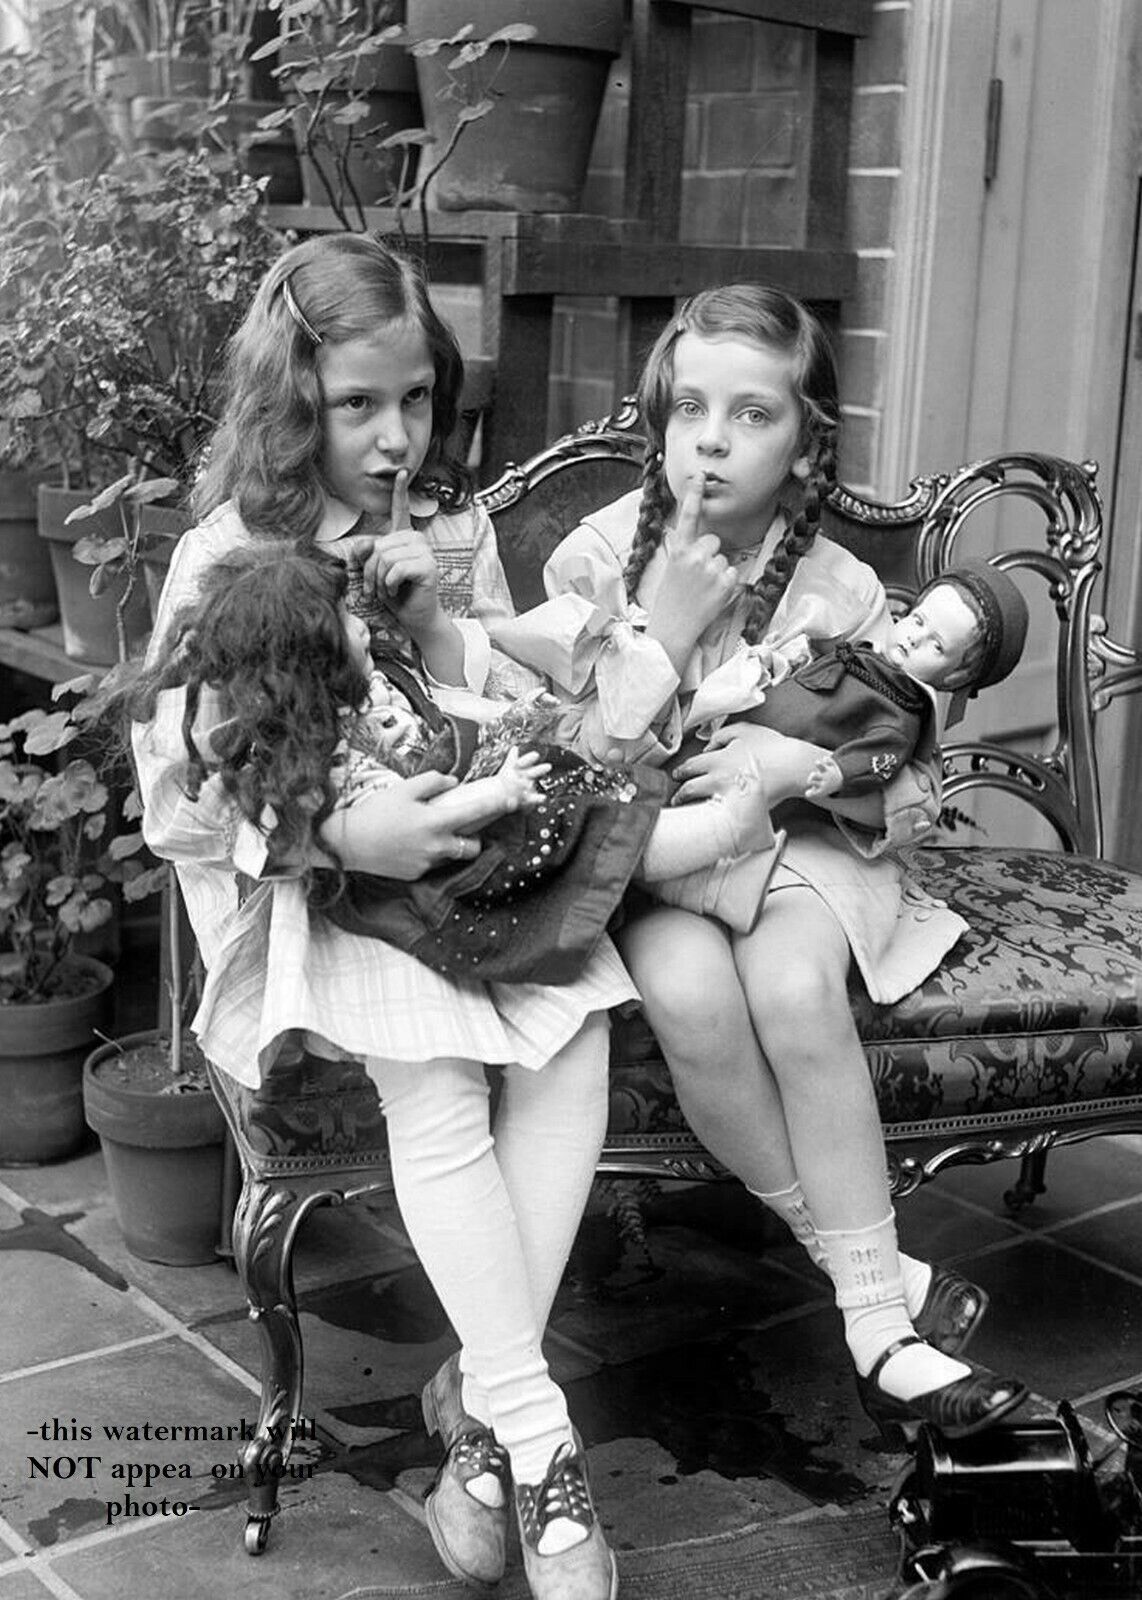 Vintage Girls Playing With Dolls PHOTO Cute Kids Creepy Scary Dolls, Circa 1920